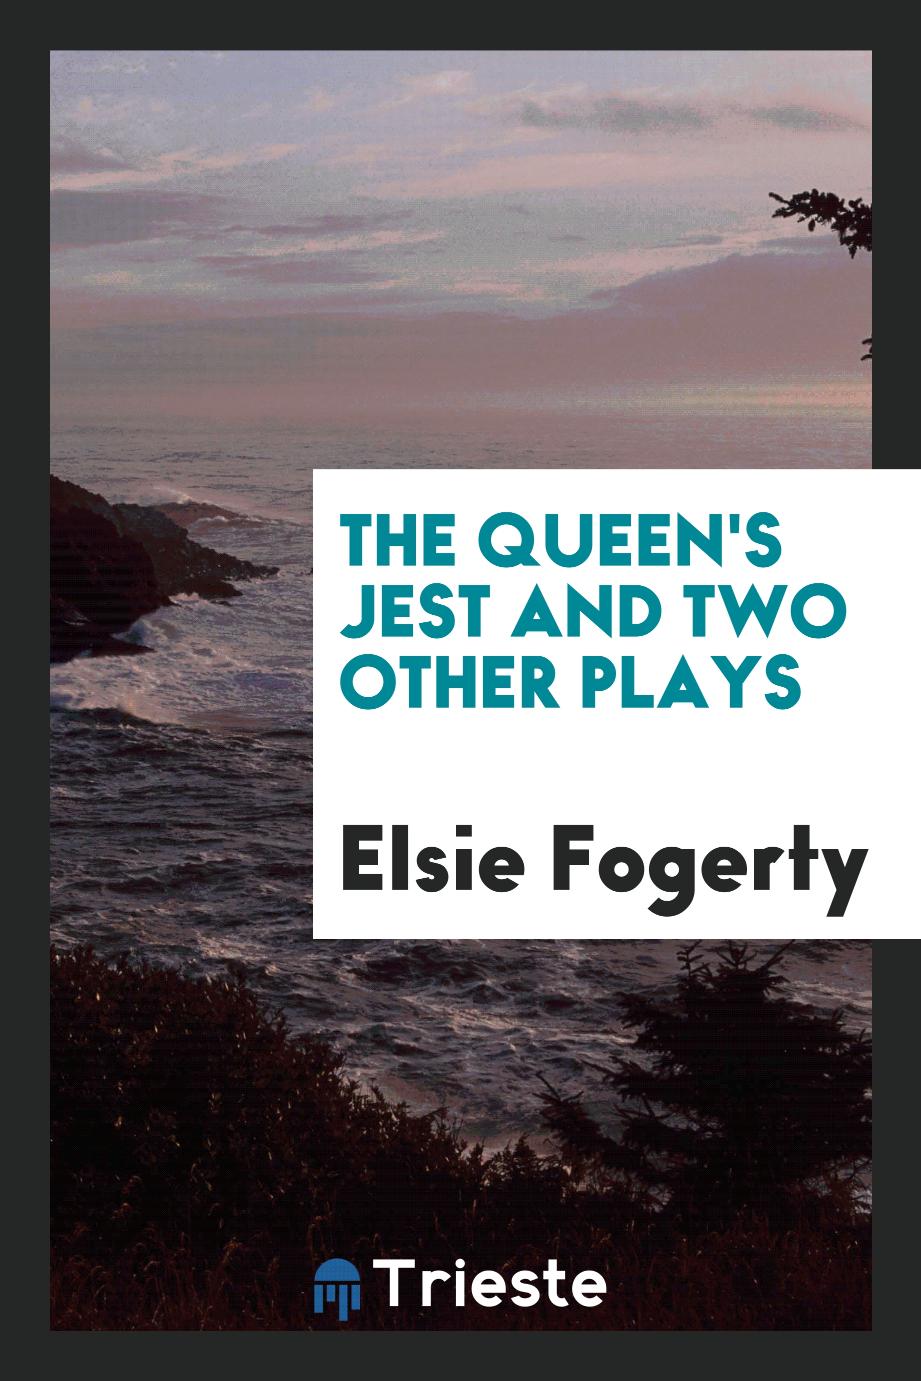 The Queen's Jest and Two Other Plays